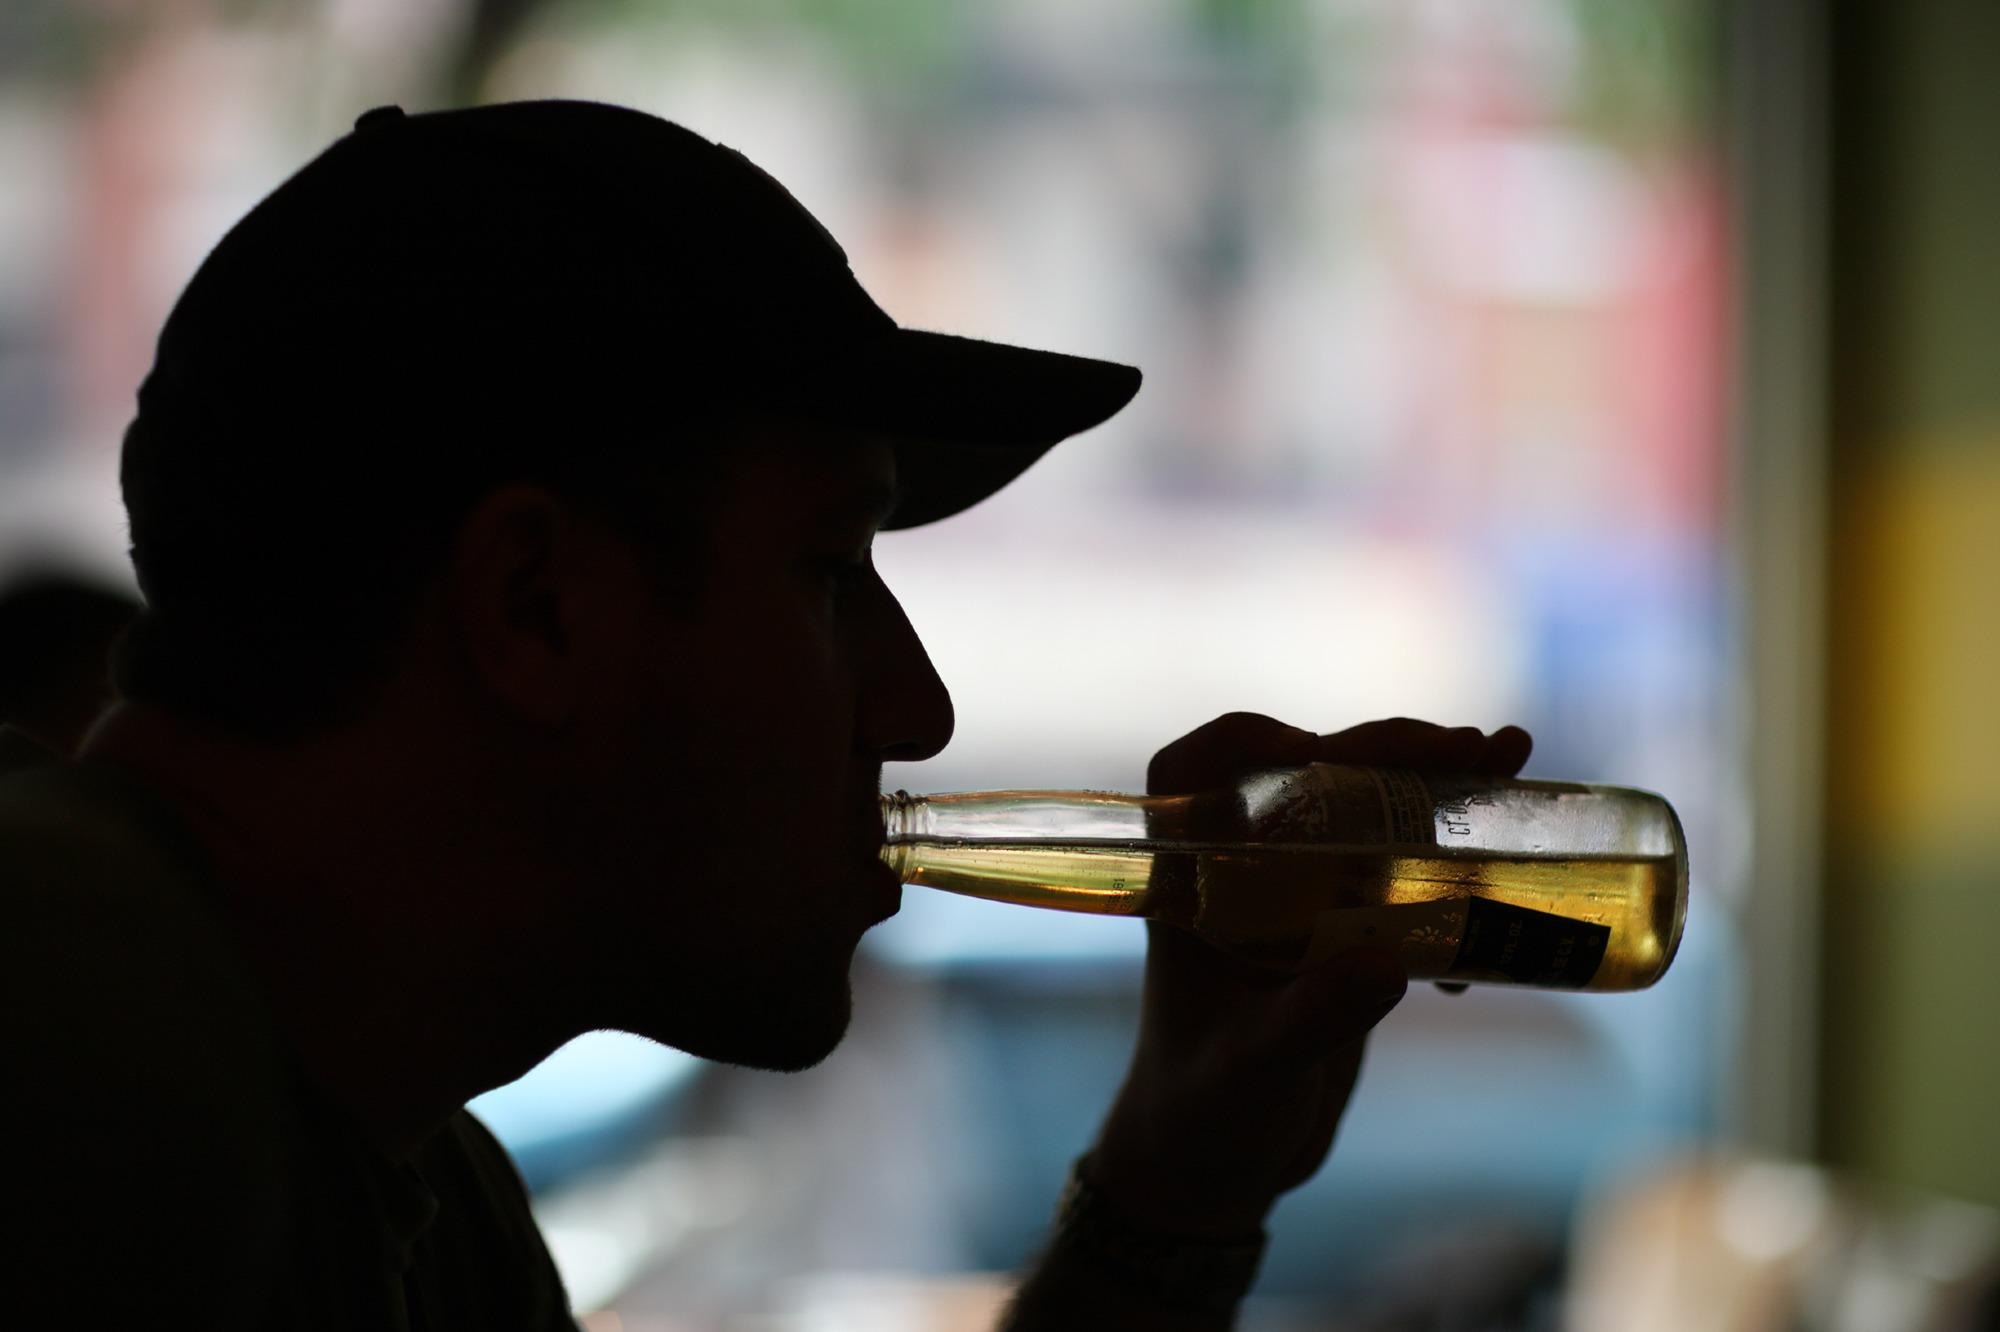 Study: Alcohol use trajectories among U.S. adults during the first 42 weeks of the COVID-19 pandemic. Image Credit: logoboom / Shutterstock